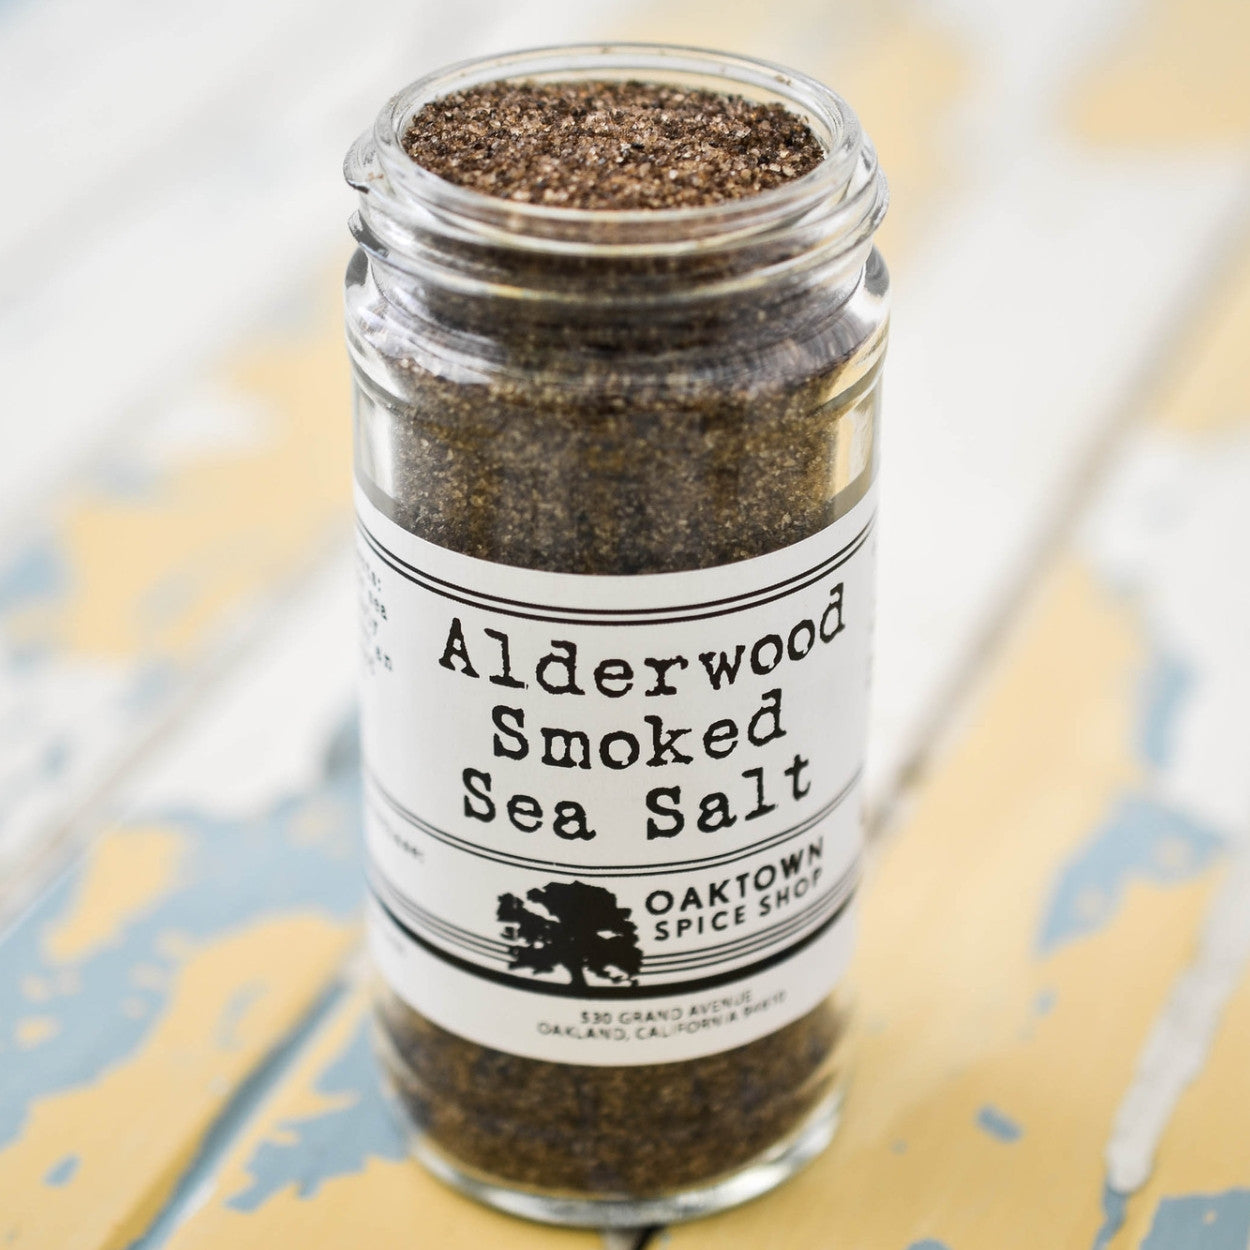 2 cup jar This Pacific Sea Salt is Smoked over True Alderwood from Oaktown Spice Shop